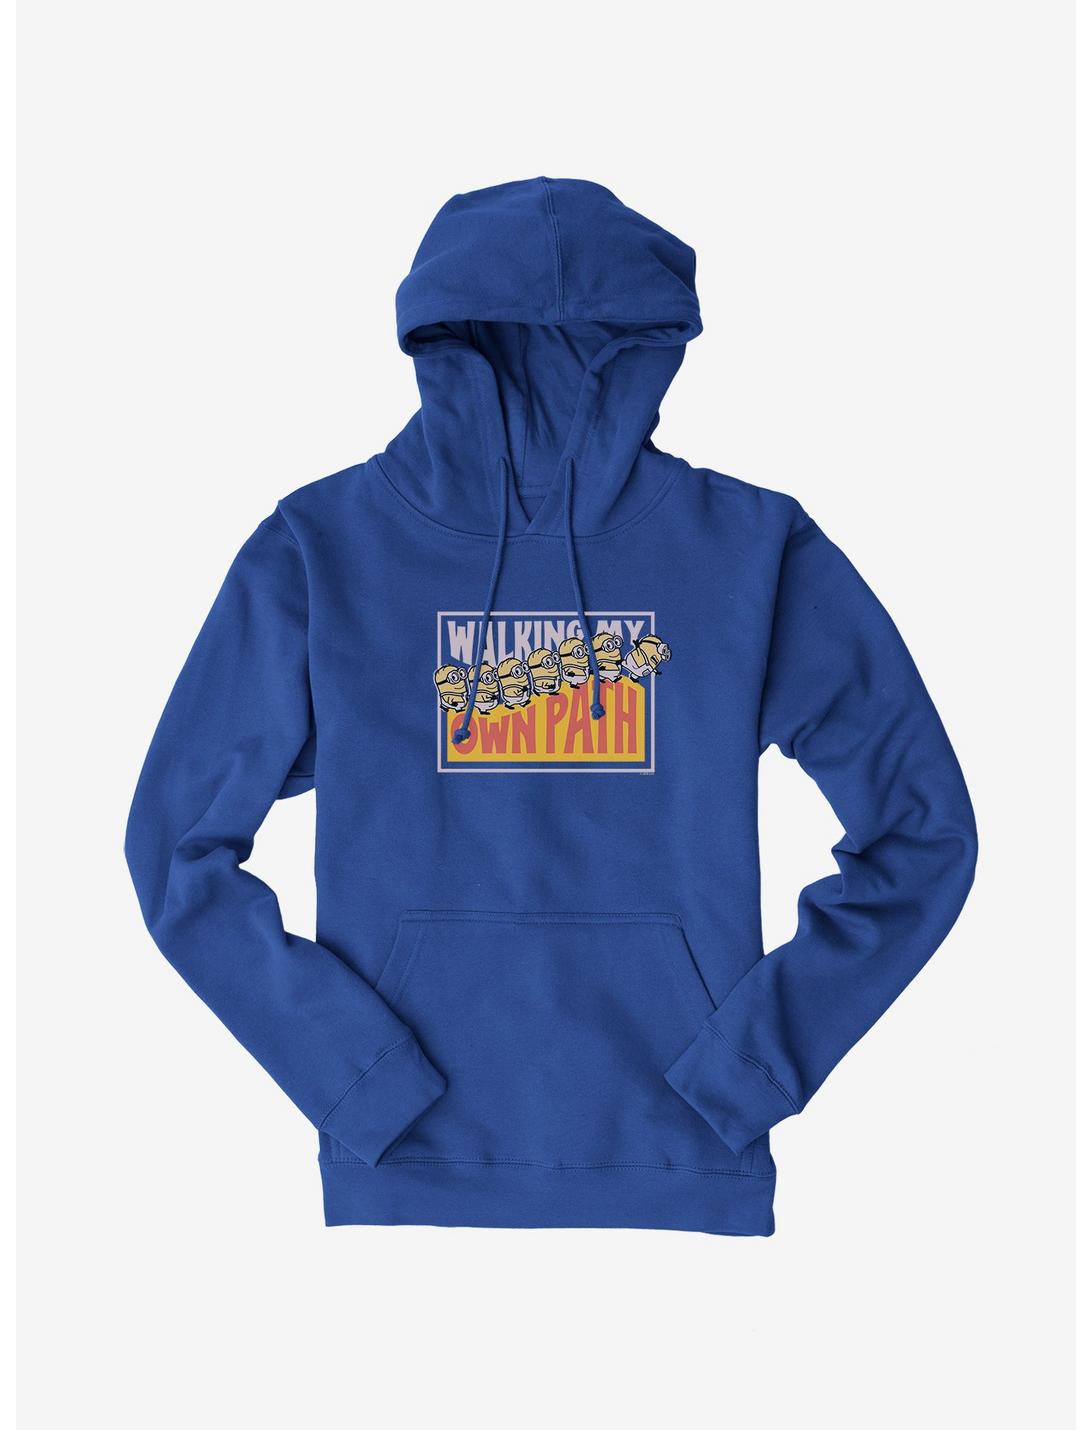 Minions On My Own Path Panel Hoodie, ROYAL BLUE, hi-res